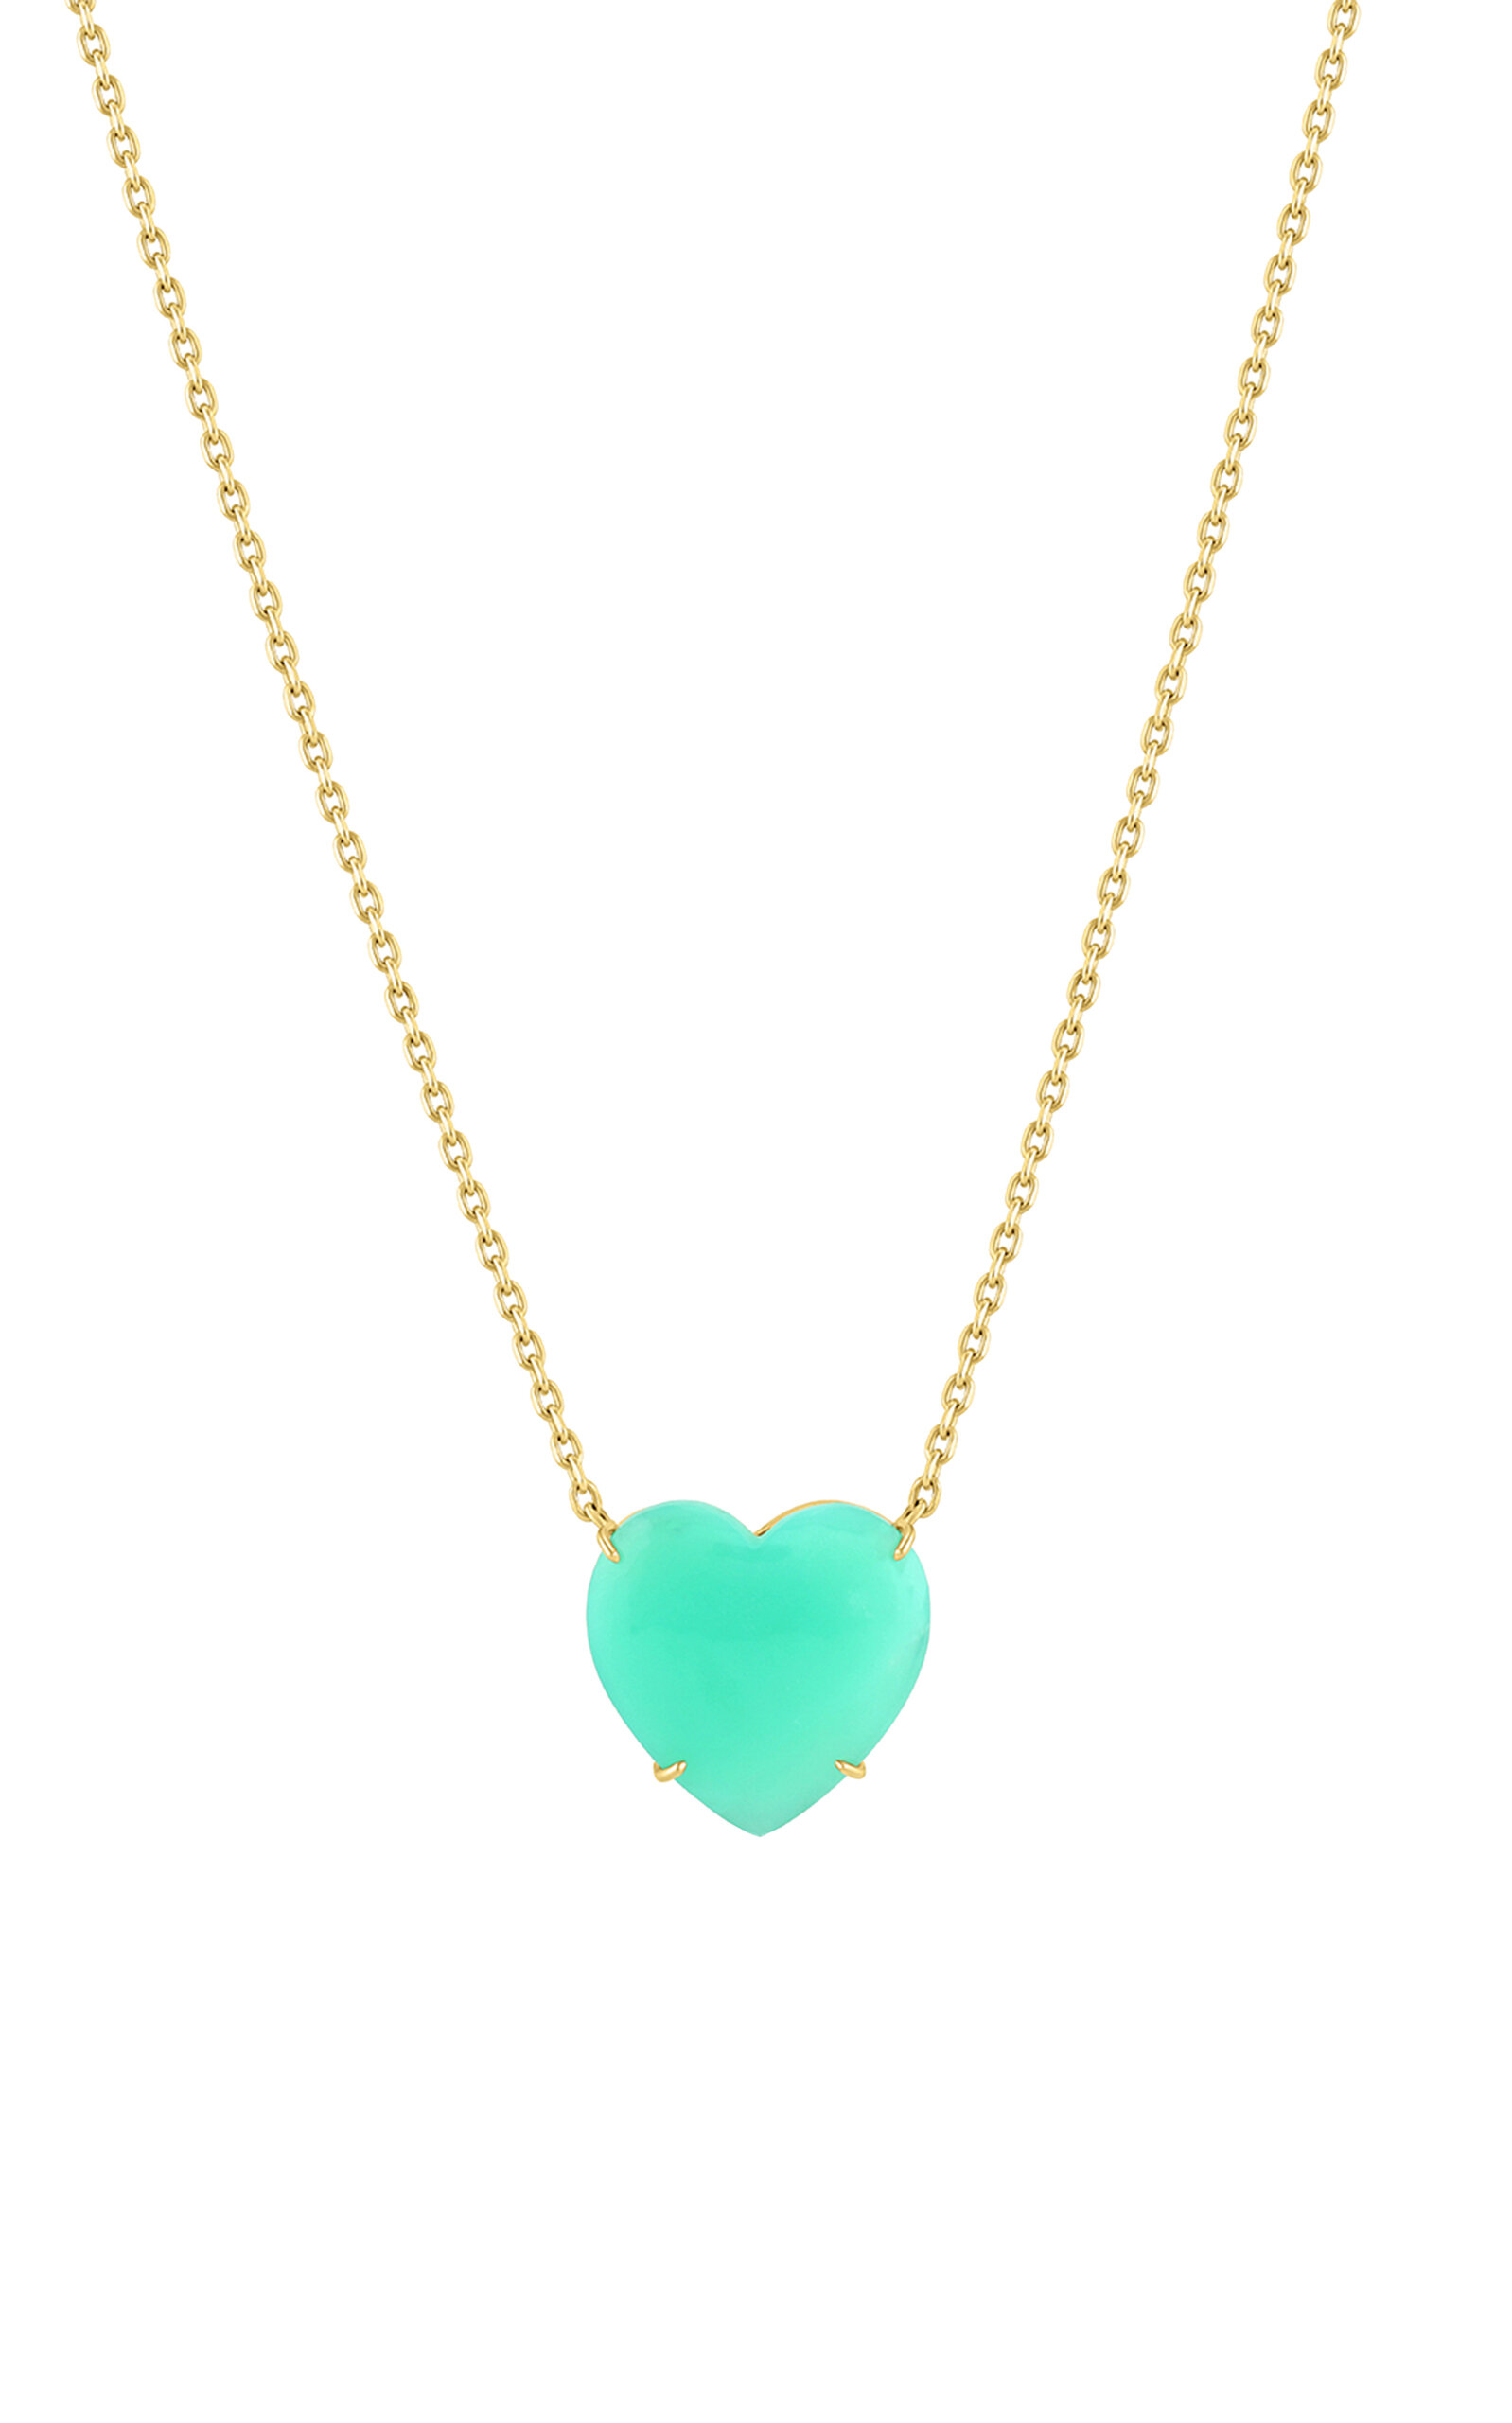 M.spalten Women's The Single Heart Lady 14k Yellow Gold Chrysoprase Necklace In Green